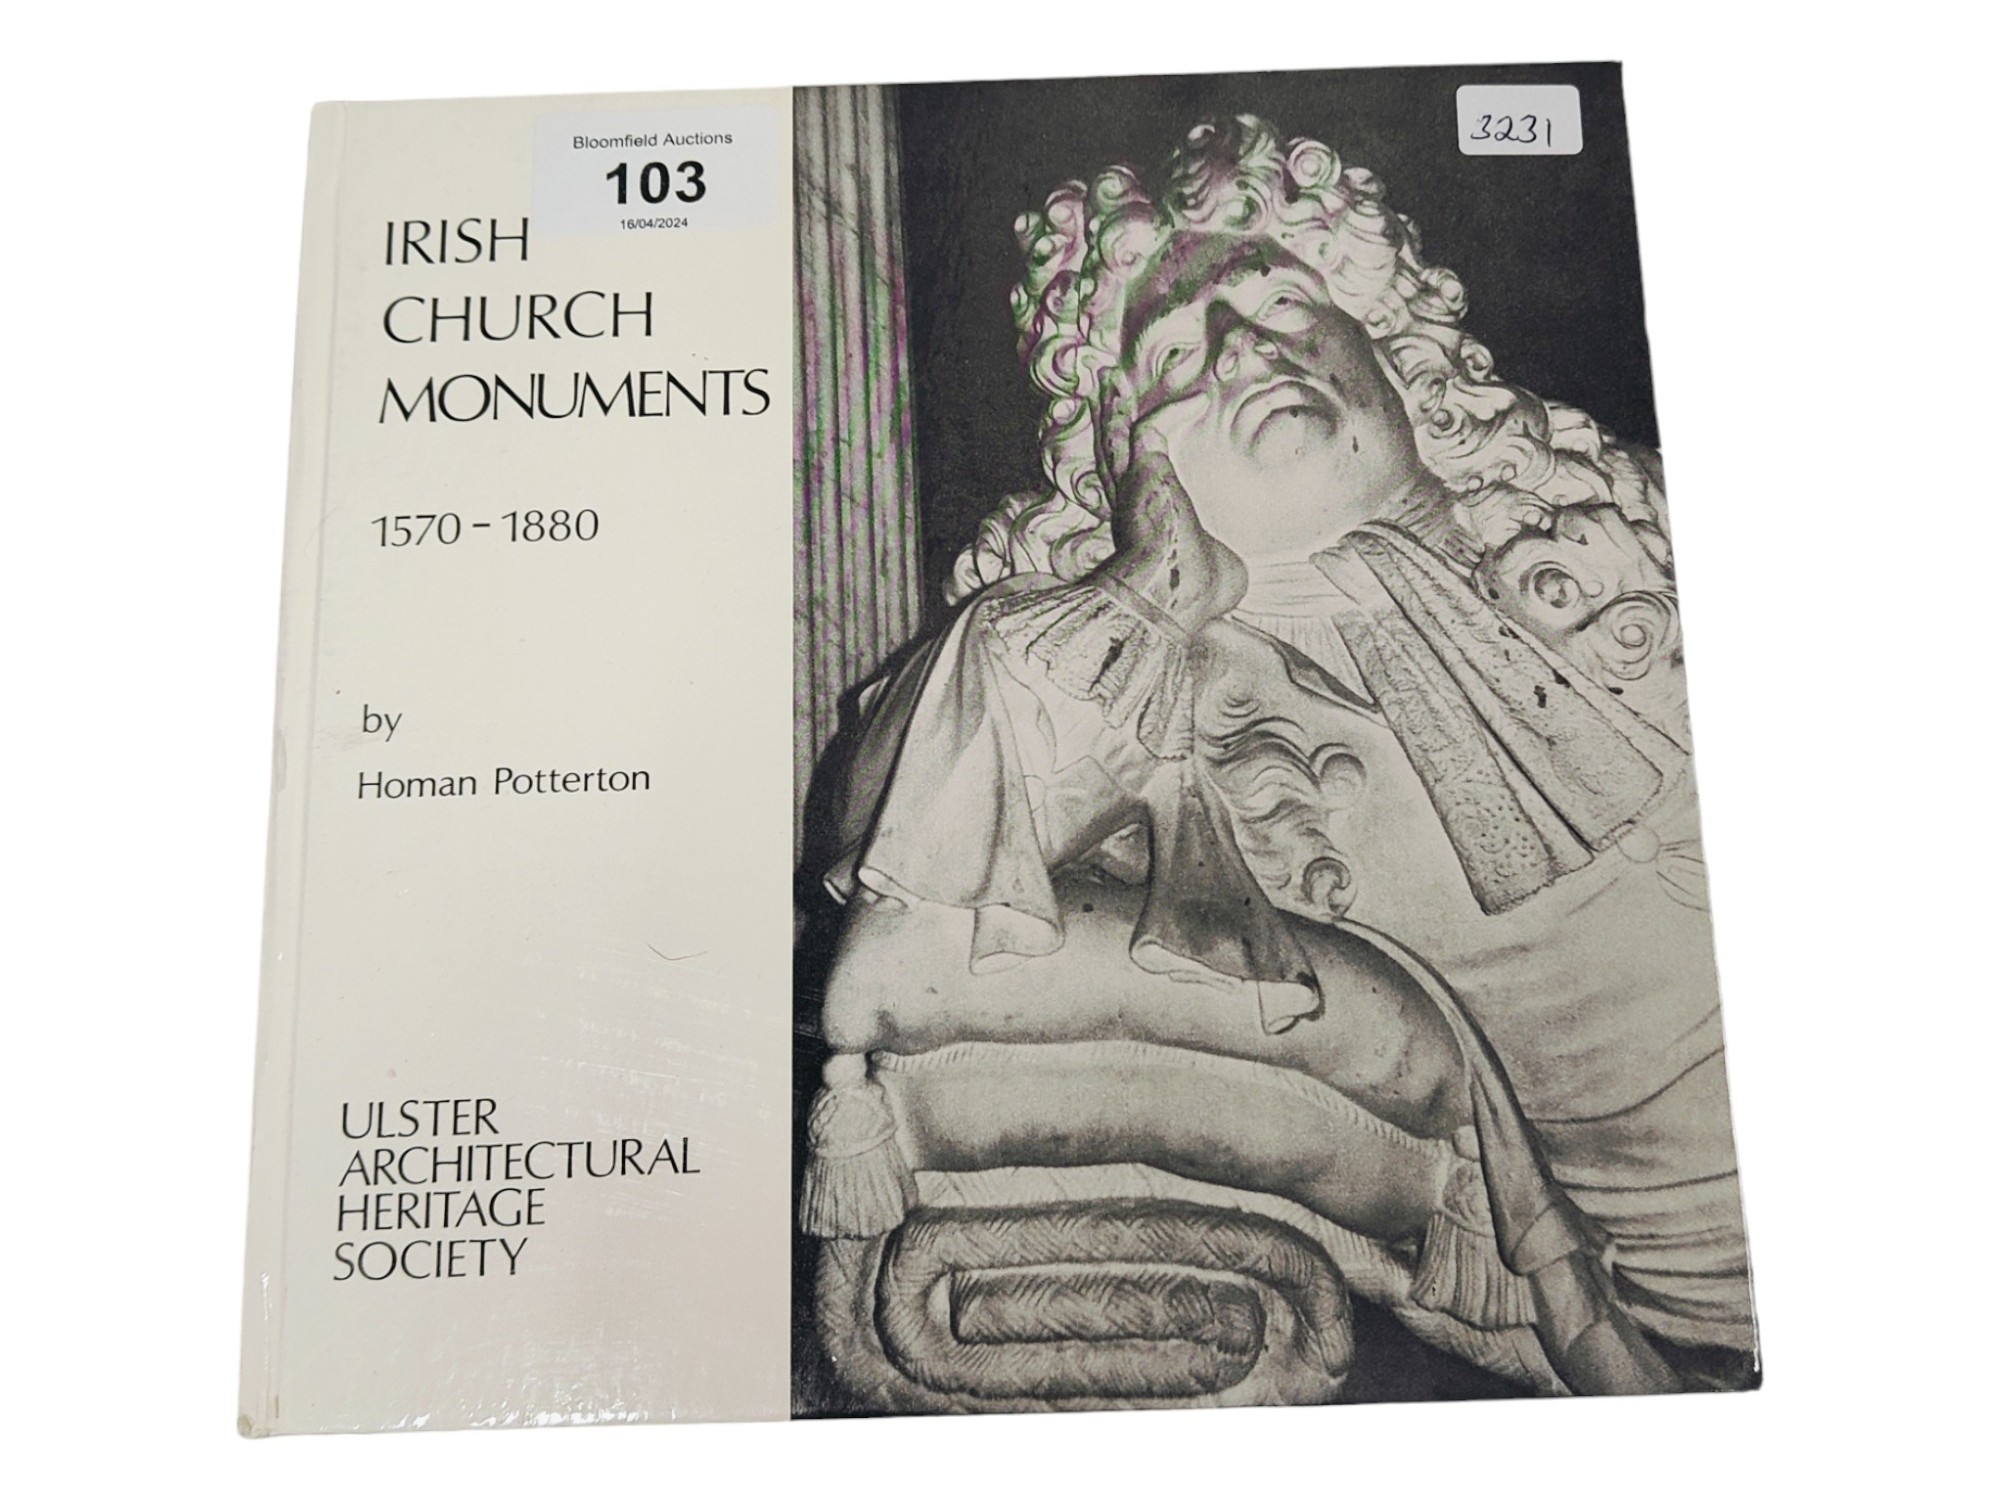 BOOK - THE BILL PARKER COLLECTION - IRISH CHURCH MONUMENTS 1570-1880, HOMAN POTTERSON - PUBLISHED BY